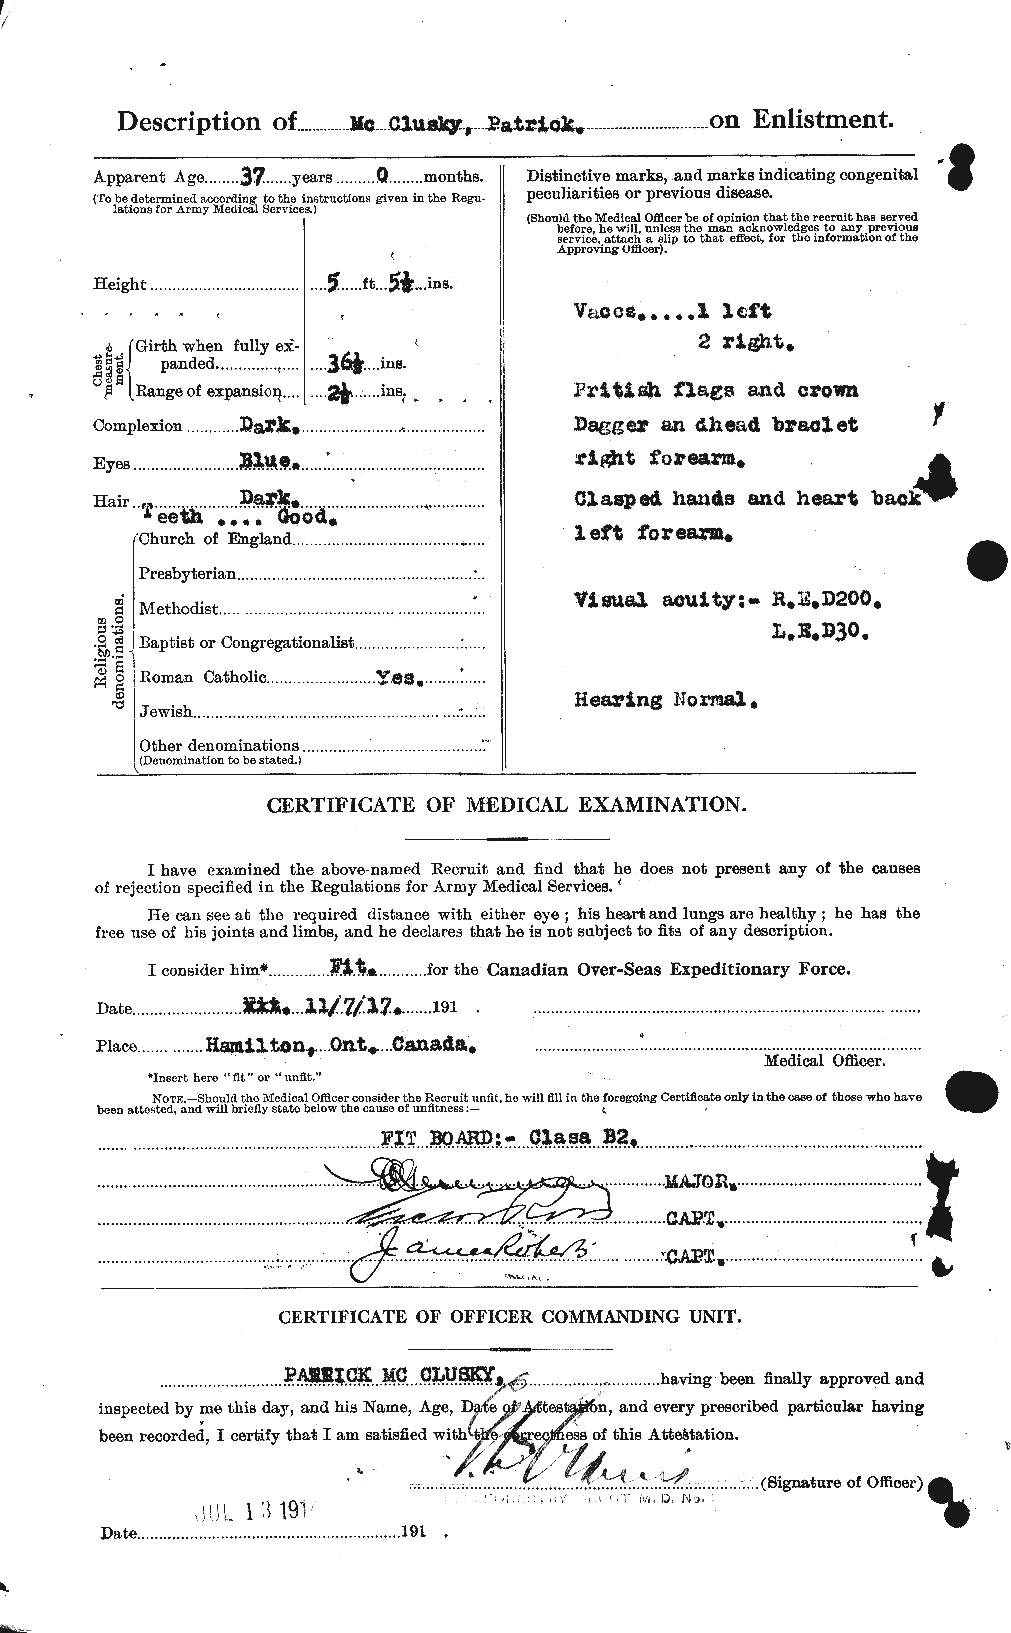 Personnel Records of the First World War - CEF 133467b